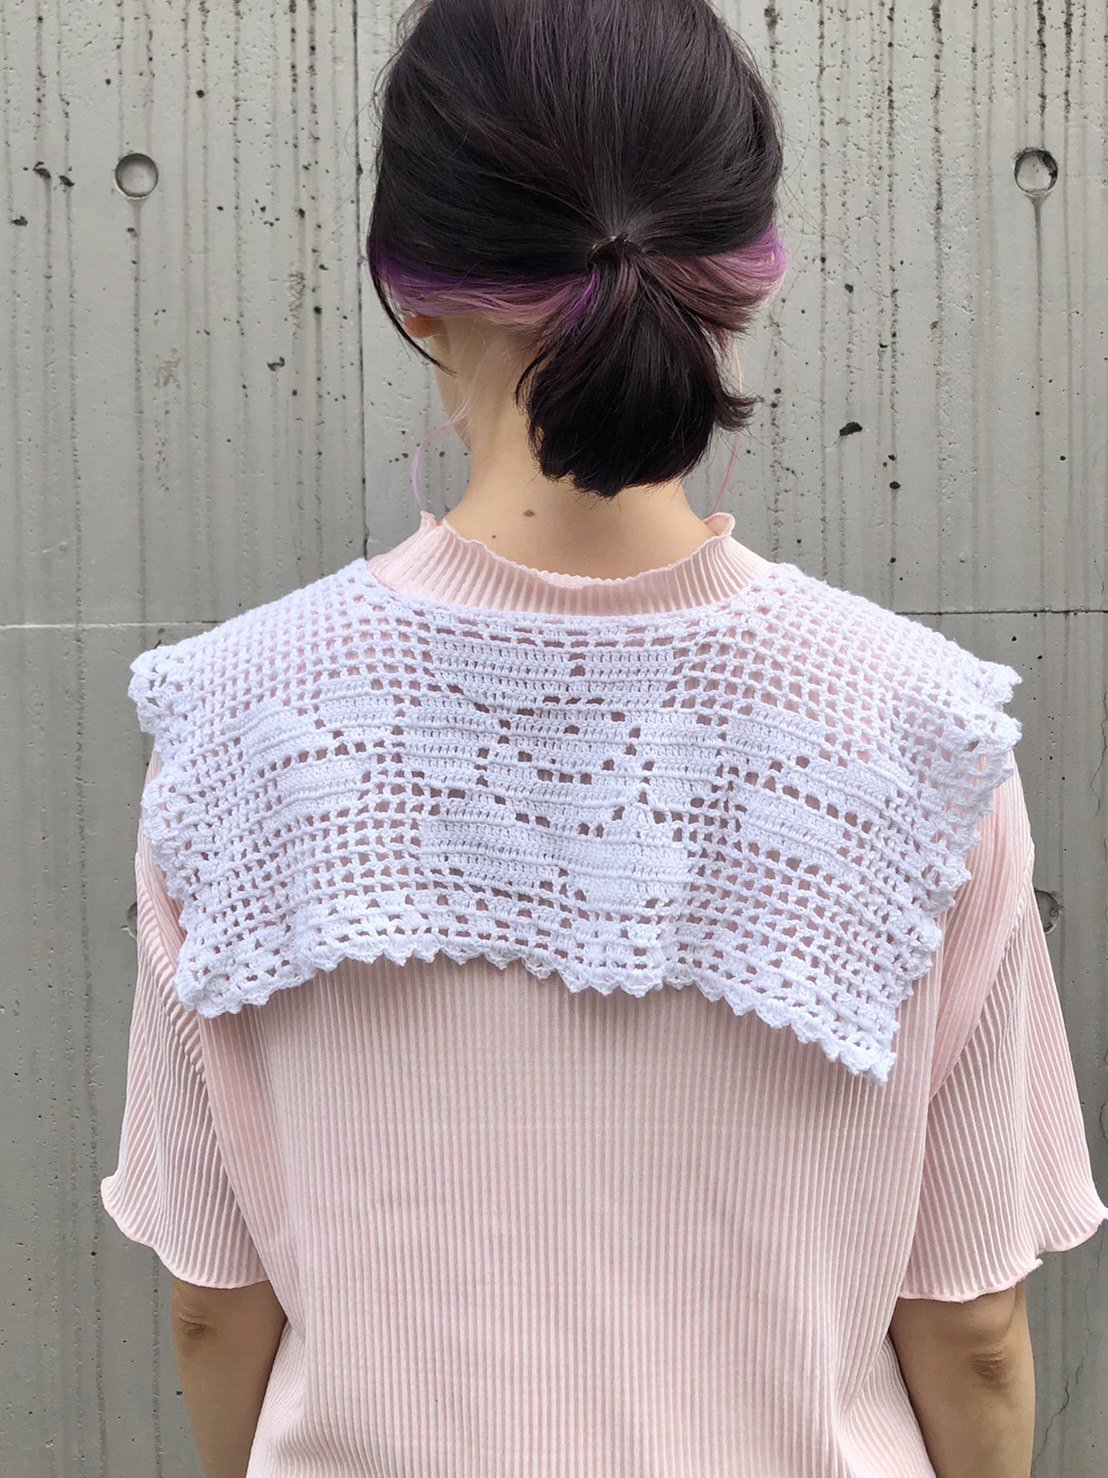 <img class='new_mark_img1' src='https://img.shop-pro.jp/img/new/icons20.gif' style='border:none;display:inline;margin:0px;padding:0px;width:auto;' />《SALE》flower crochet square collar